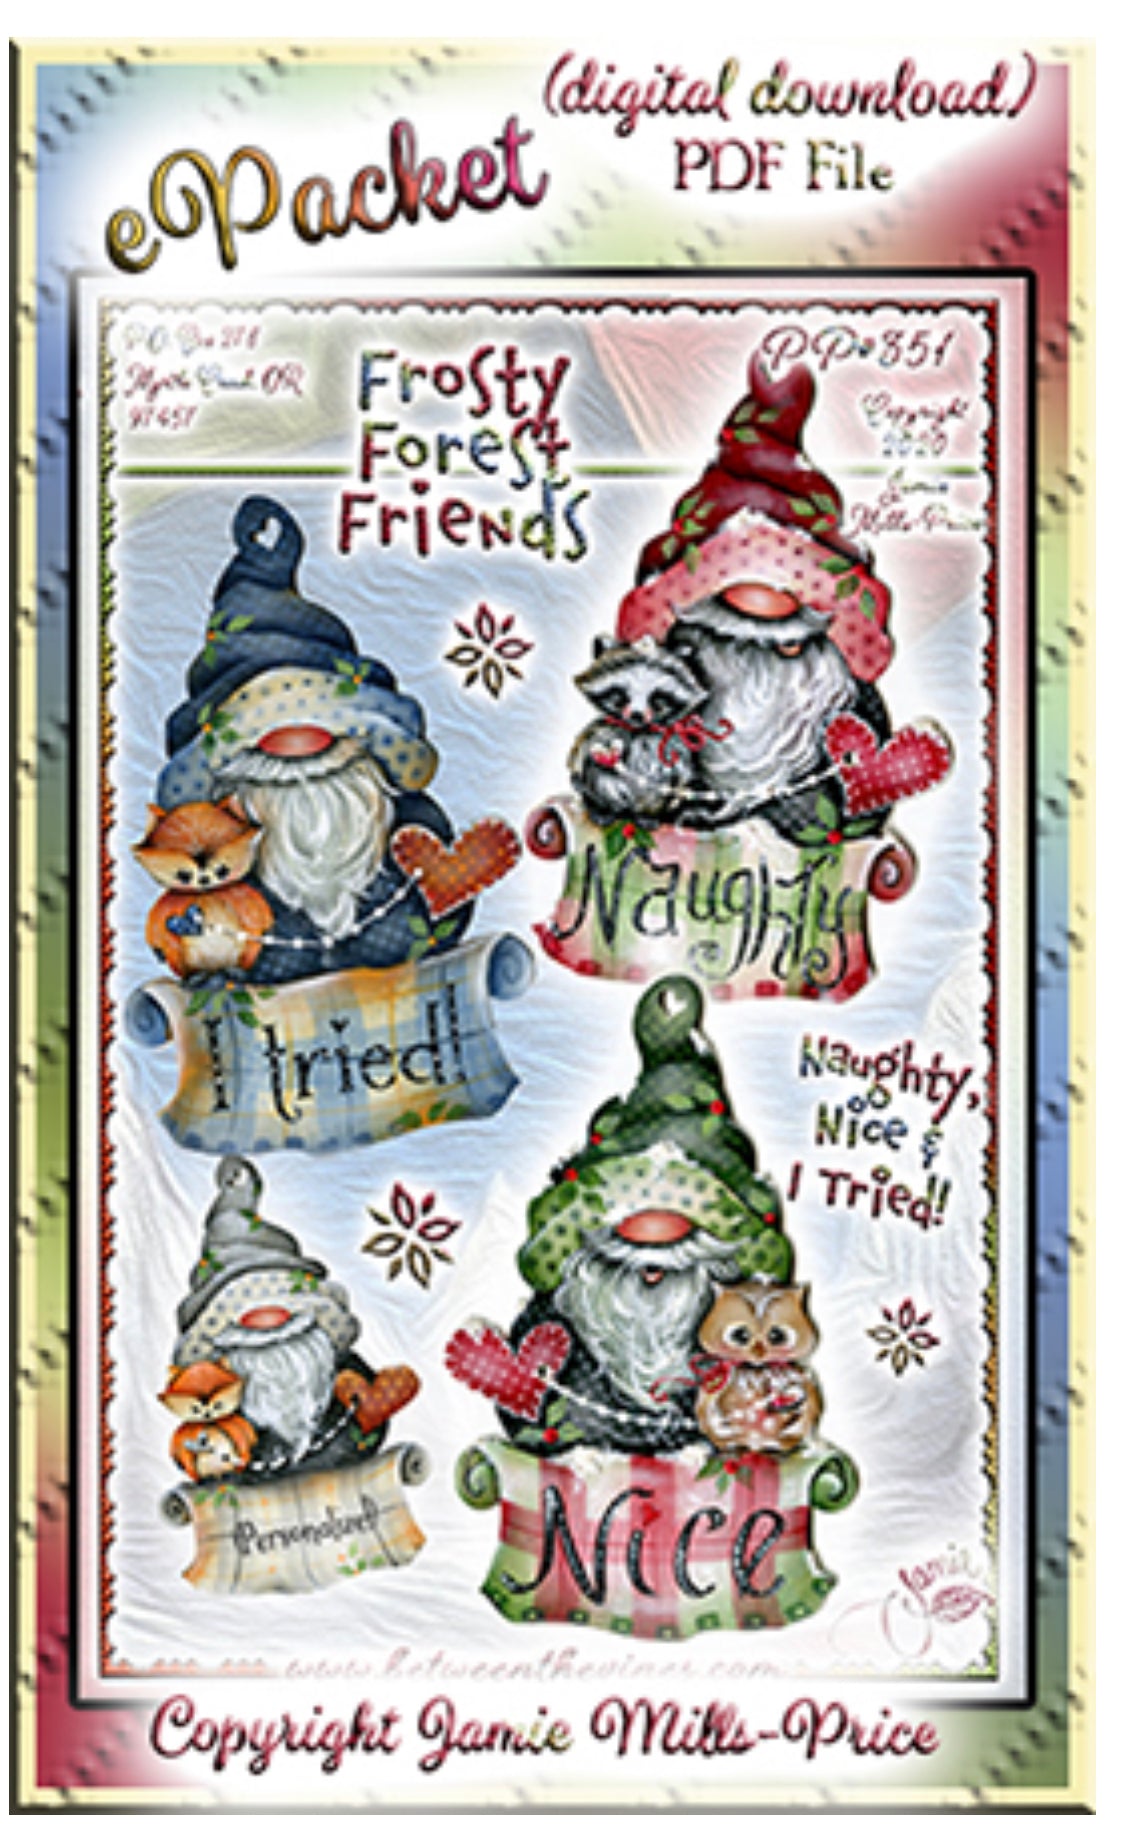 Frosty forest friends ornament By Jamie Mills price Out of the Wood